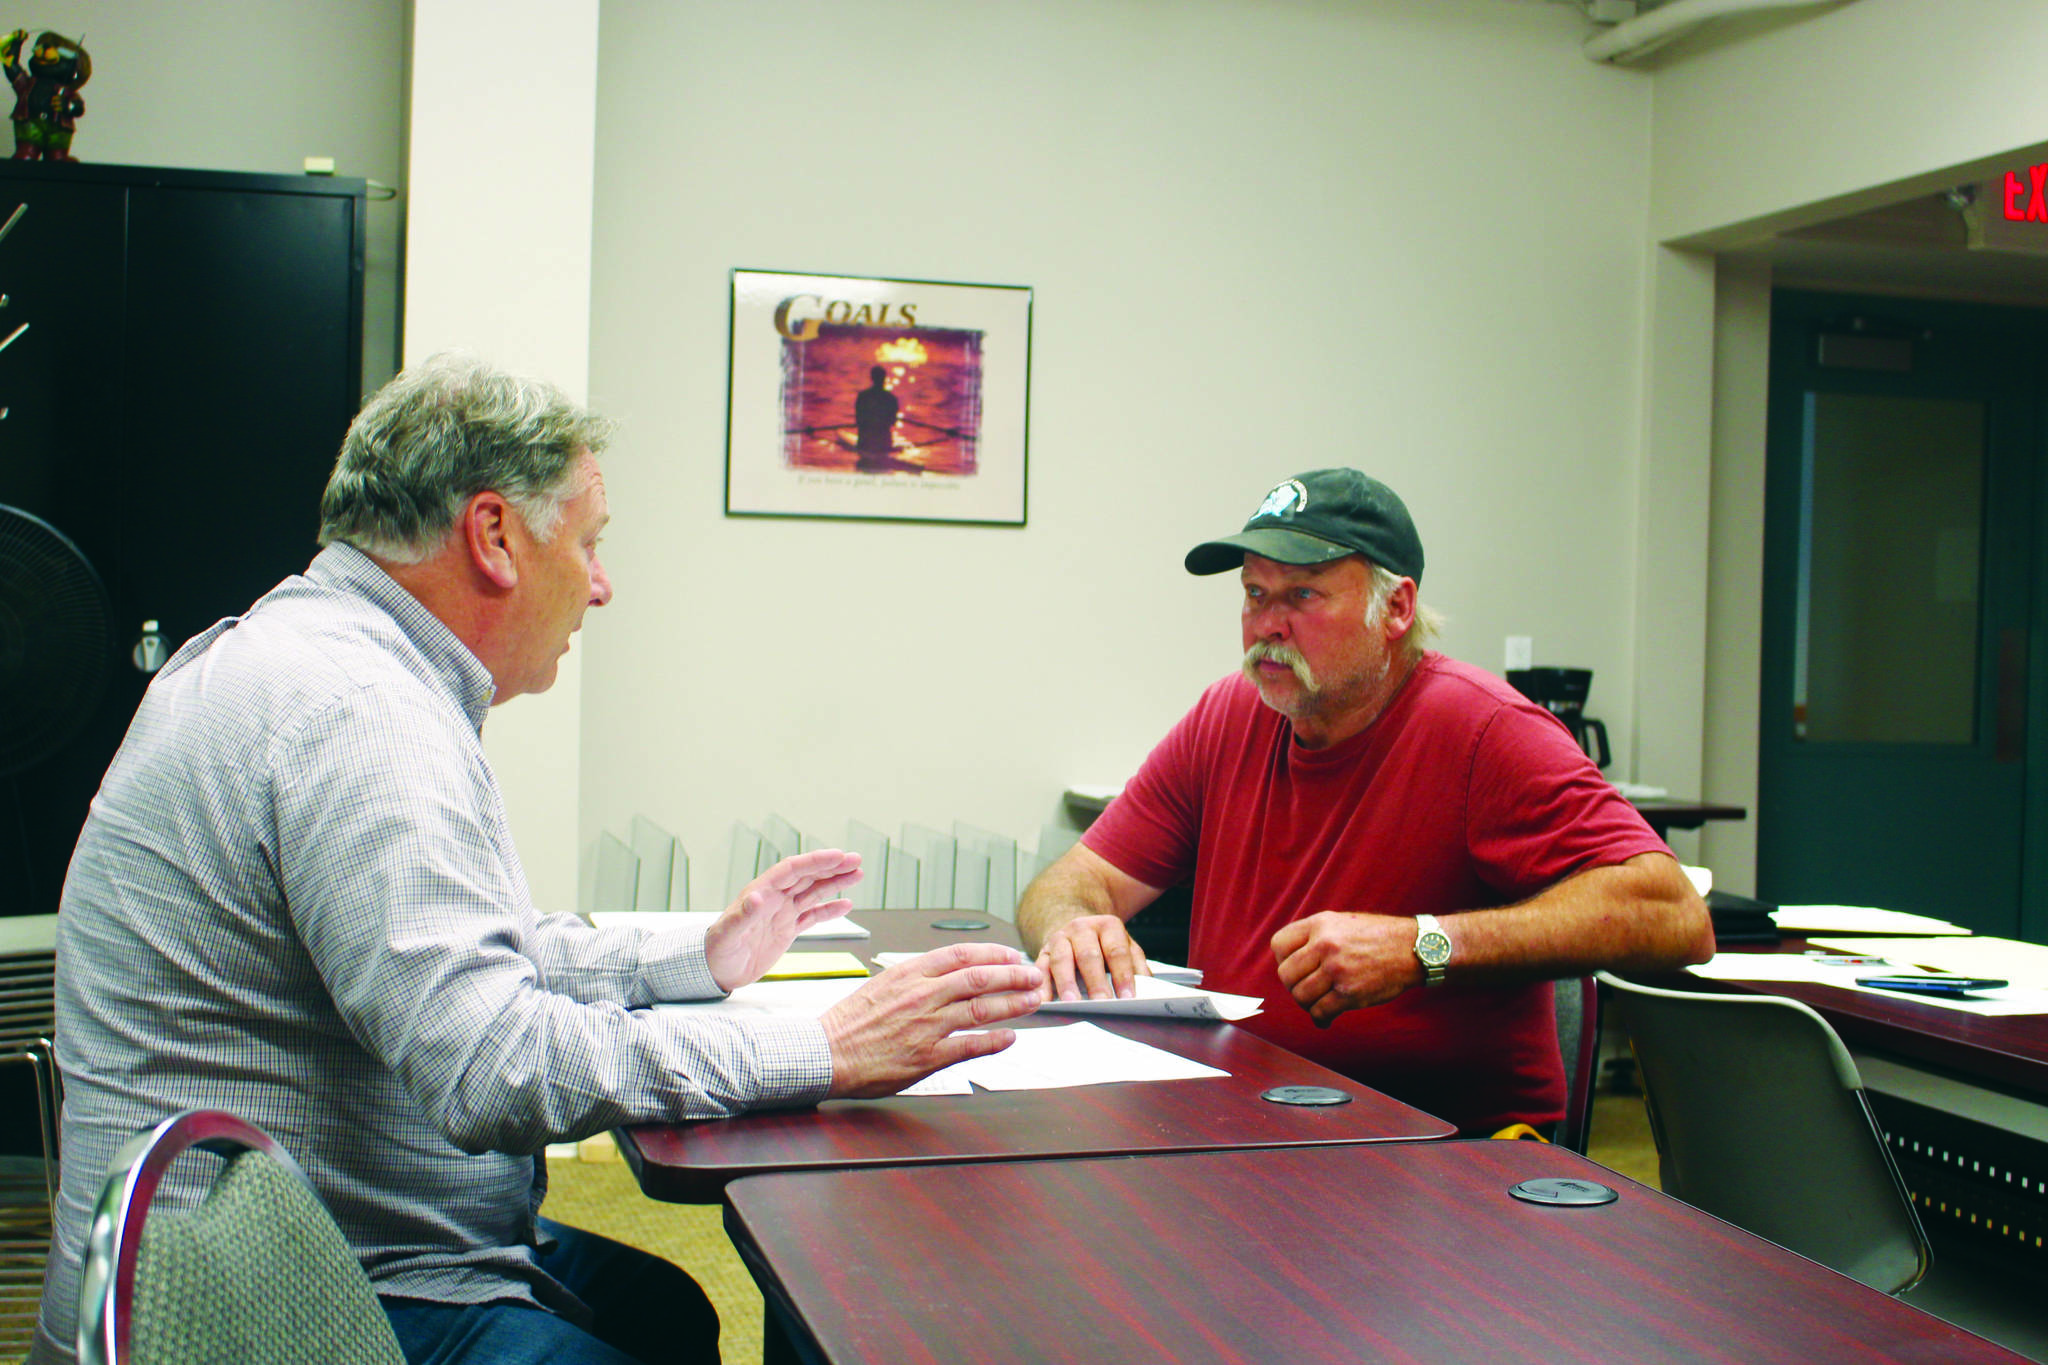 Tim Dillon, executive director of the Kenai Peninsula Economic Development District, helps Doug Weaver, owner of Northern Superior Construction, apply for an AK CARES grant through Credit Union 1 at the KPEDD office in Kenai, Alaska on July 1, 2020. (Photo by Brian Mazurek/Peninsula Clarion)